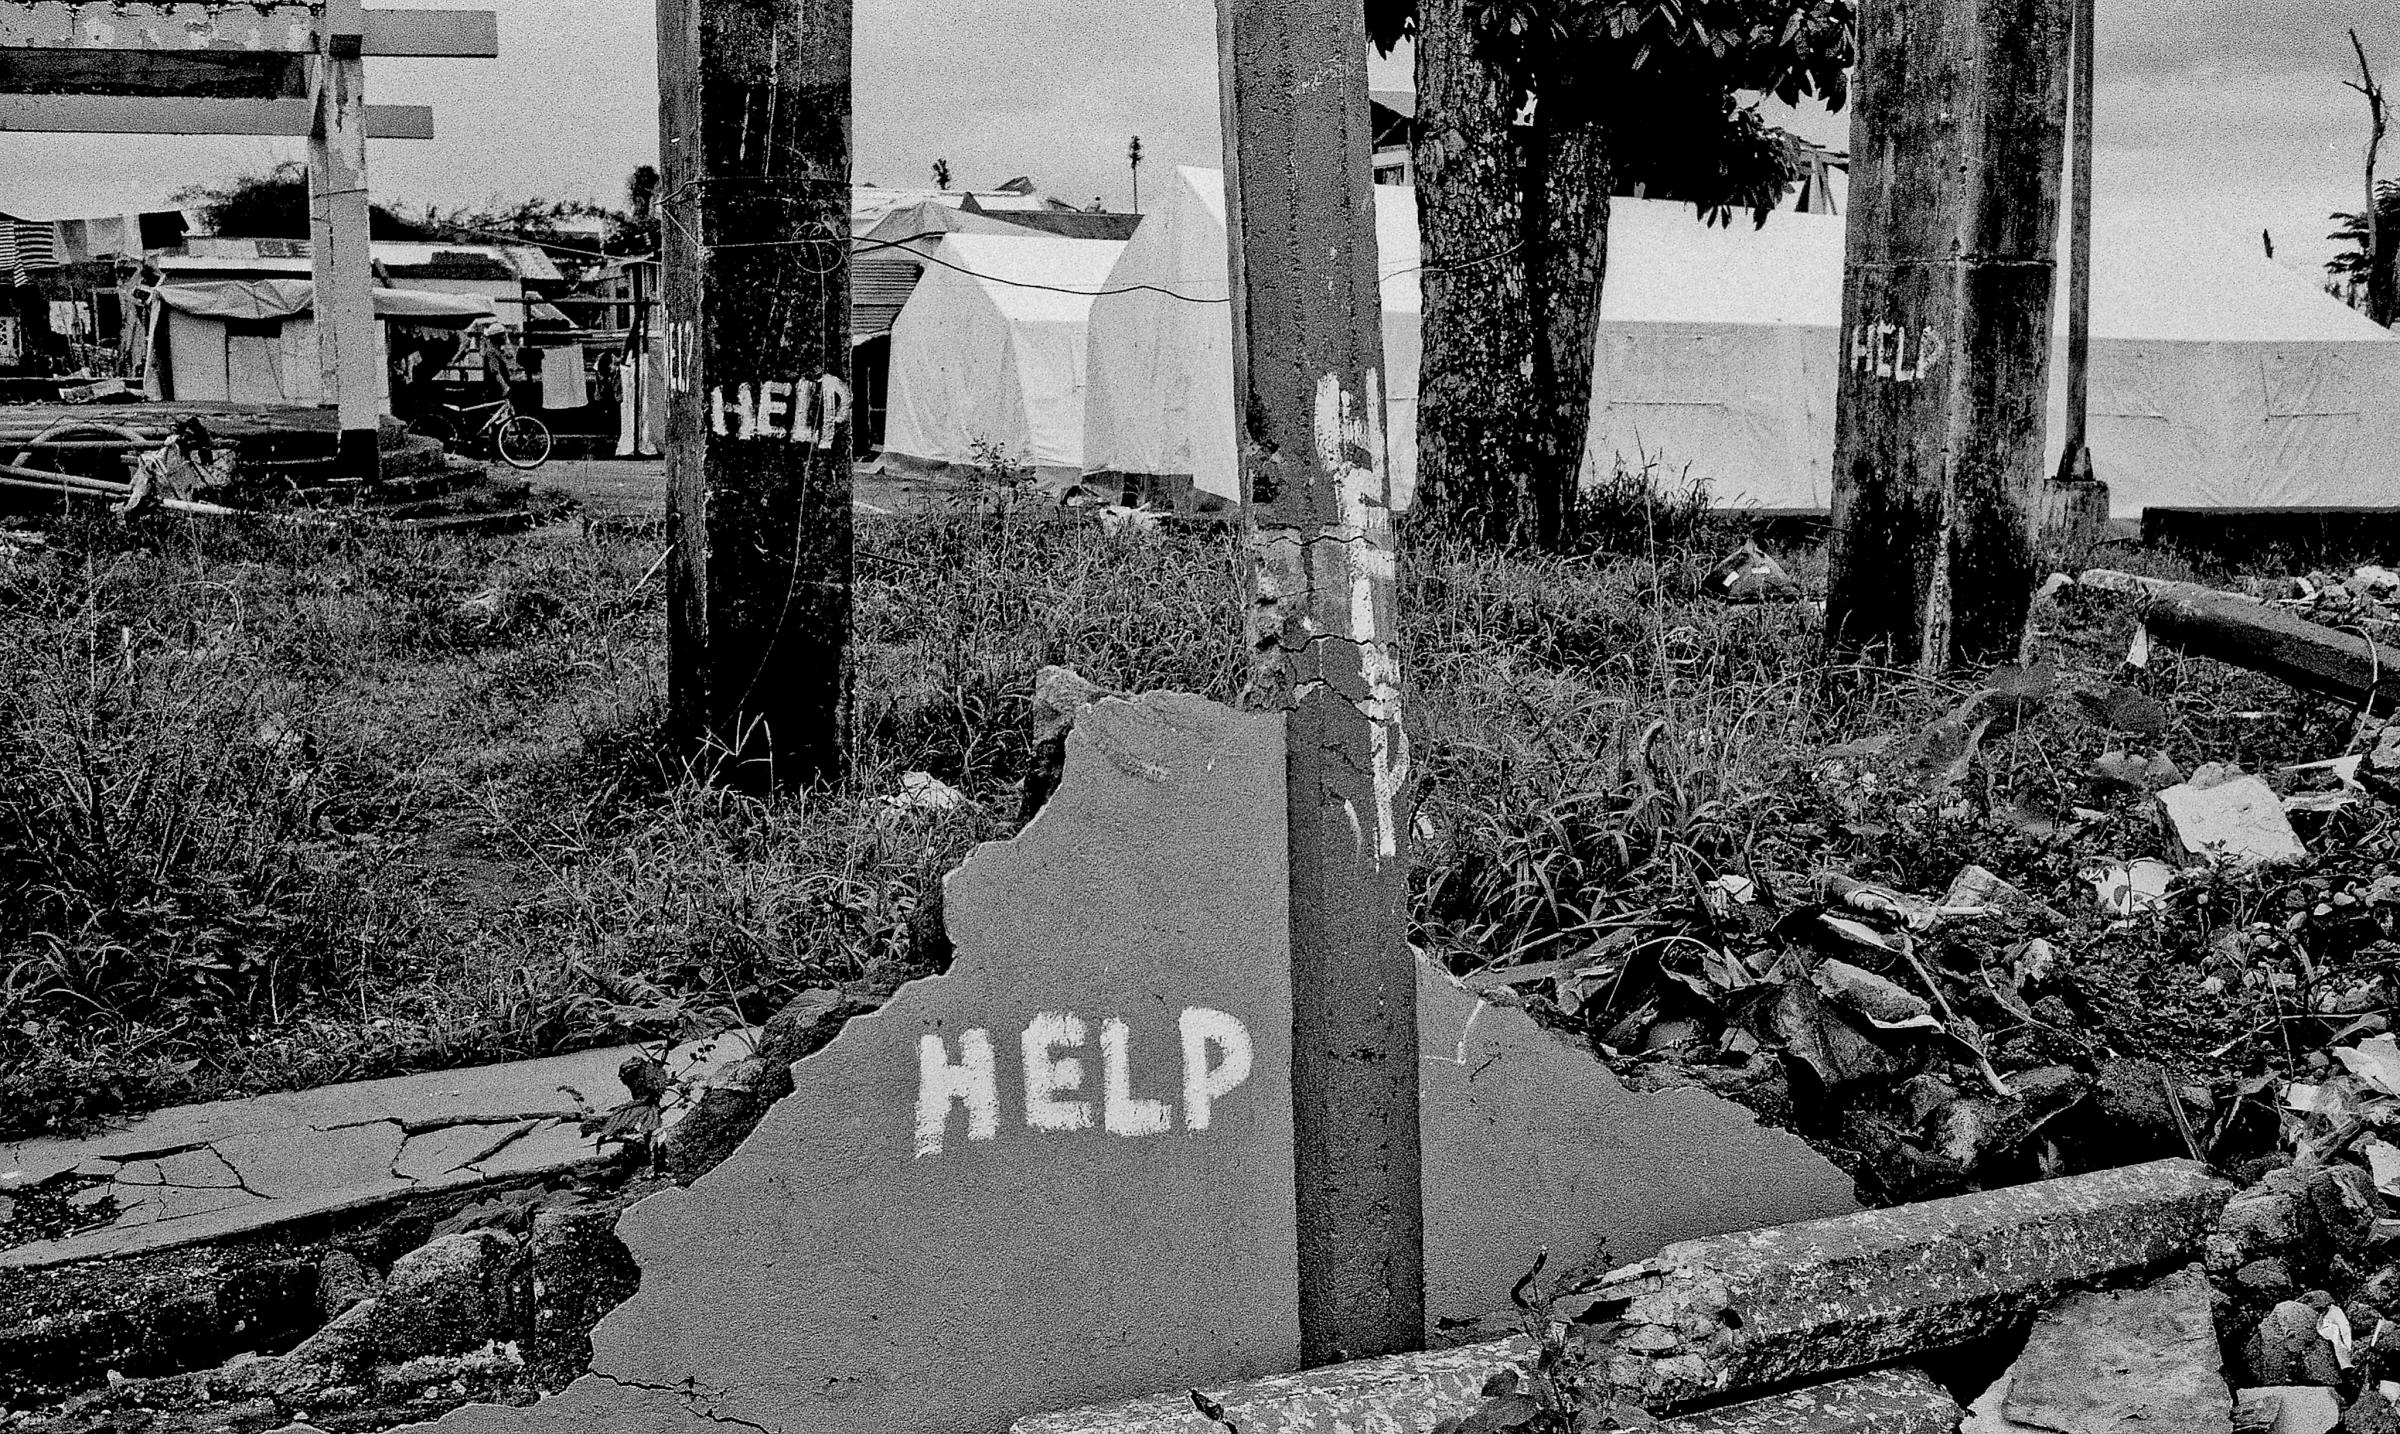 A call for help is painted on pillars in San Joaquin, Feb. 15, 2014.